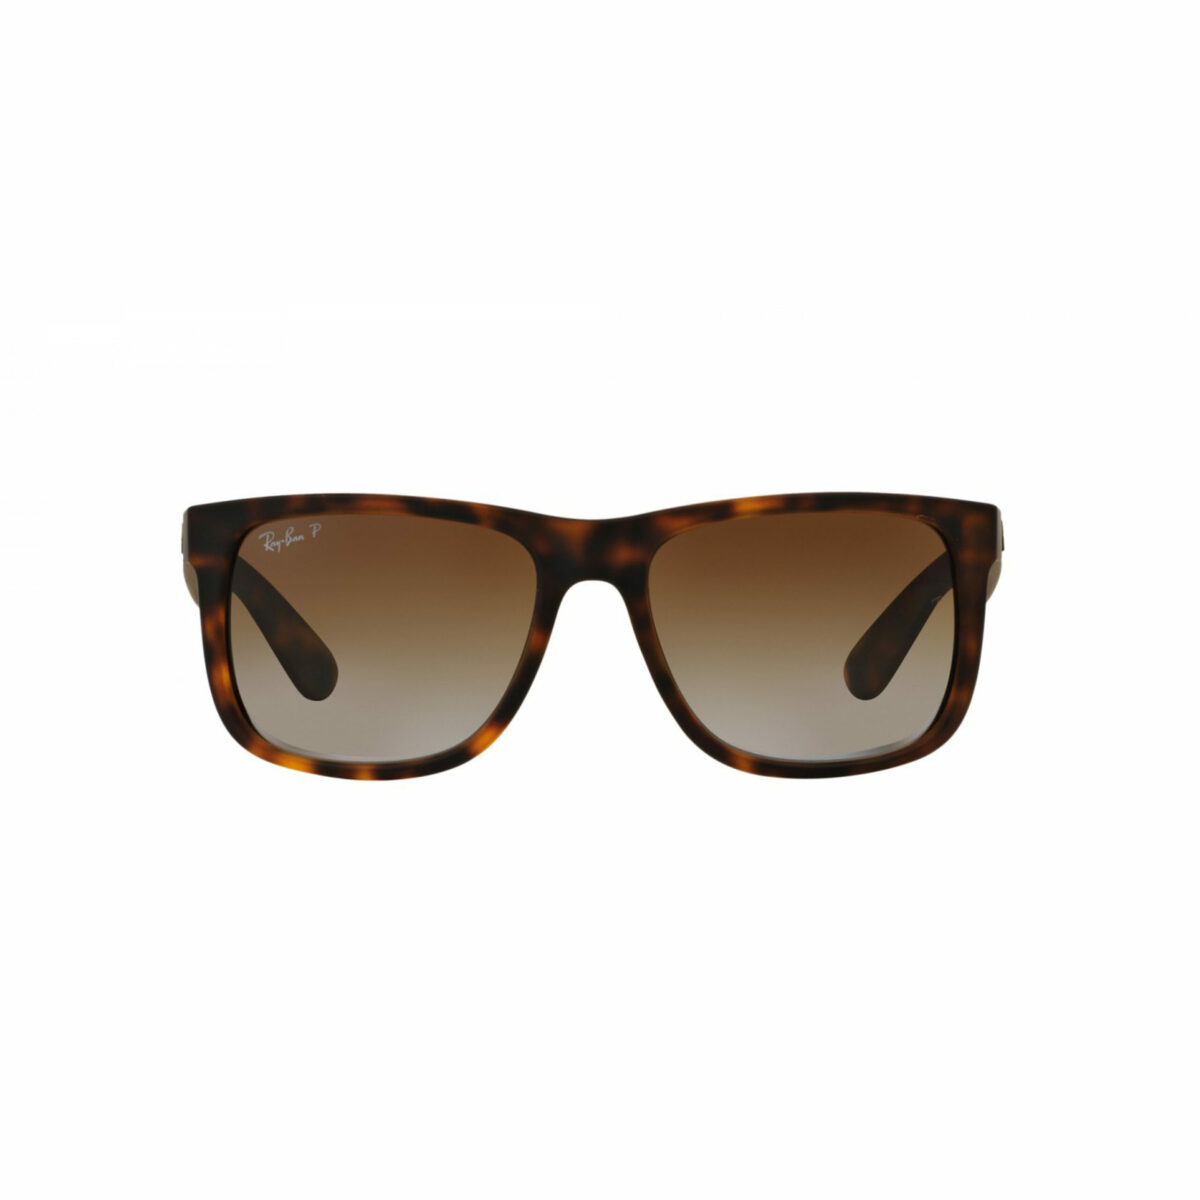 RAY-BAN RB-4165 JUSTIN-865/T5-55